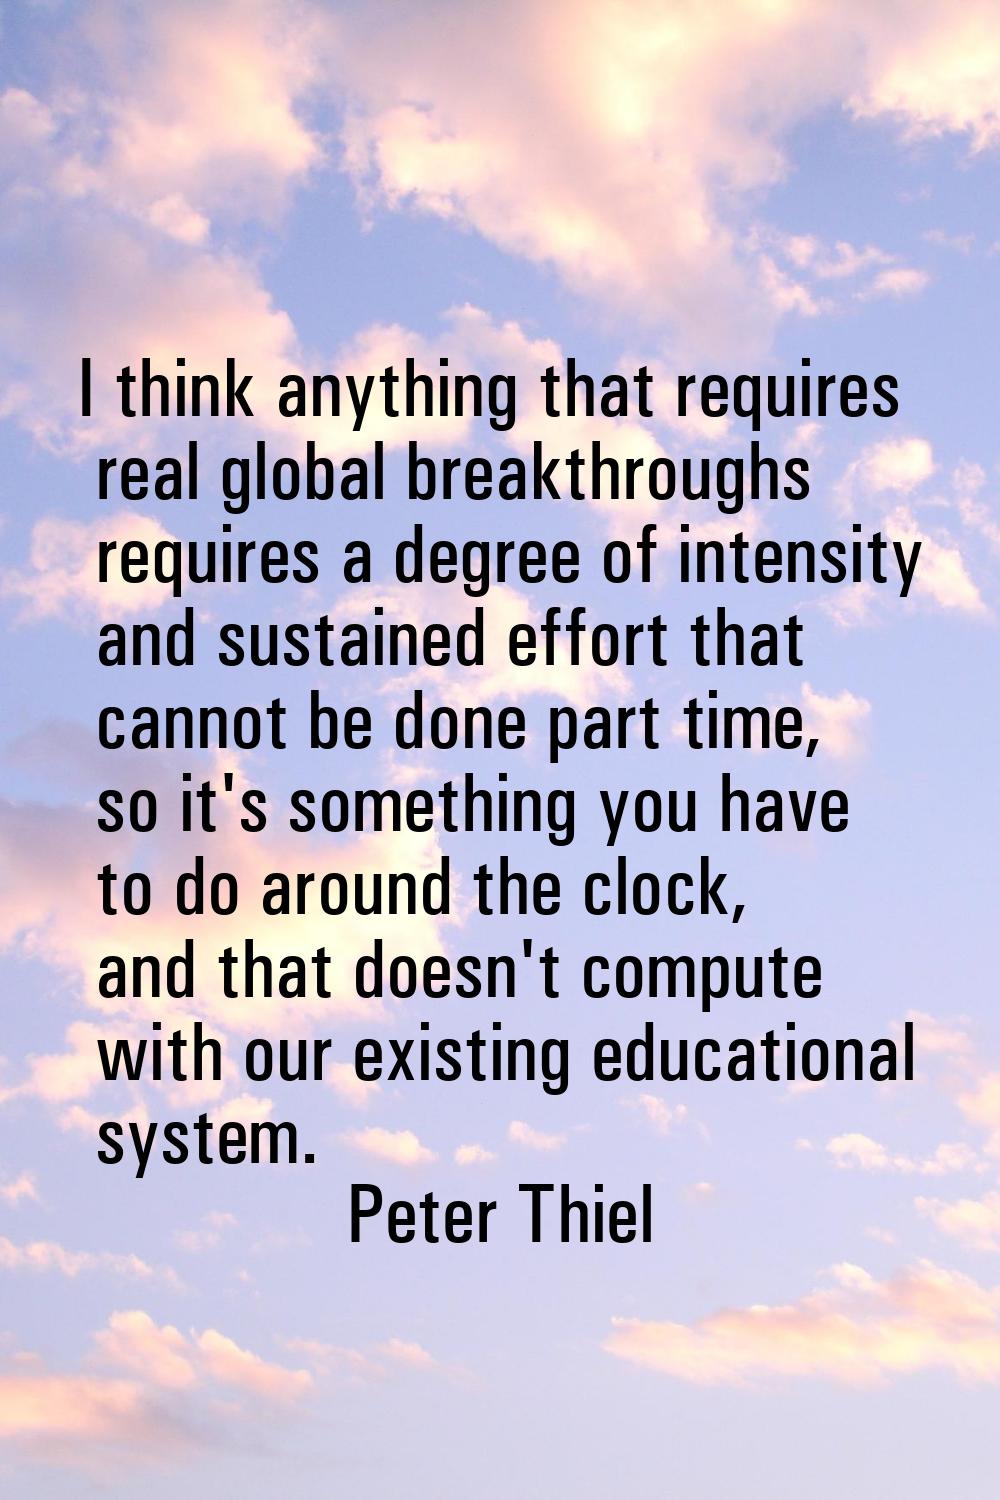 I think anything that requires real global breakthroughs requires a degree of intensity and sustain